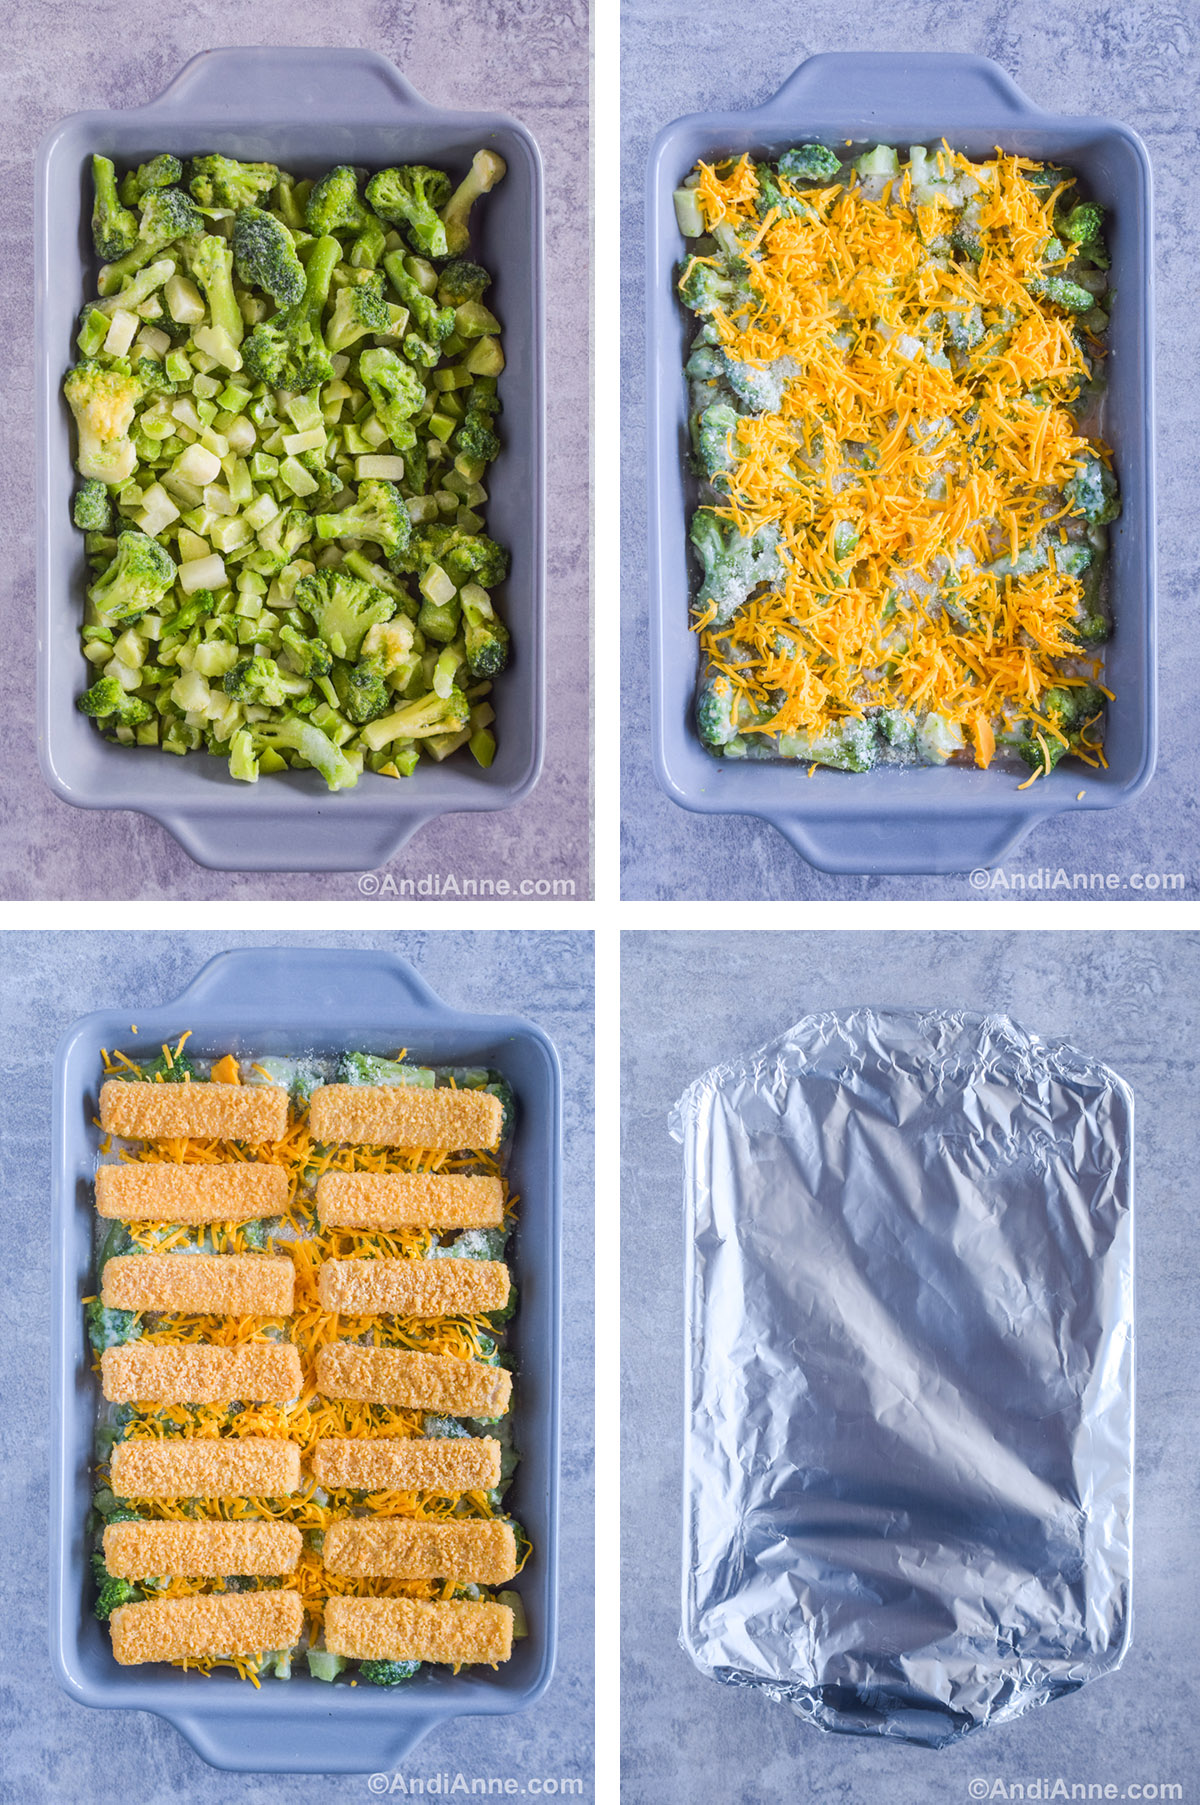 Four images showing steps to make recipe. First is frozen broccoli pieces in grey casserole dish, second is shredded cheese on top, third is frozen fish sticks in two rows on top of the casserole dish, fourth image is foil covering the casserole dish.